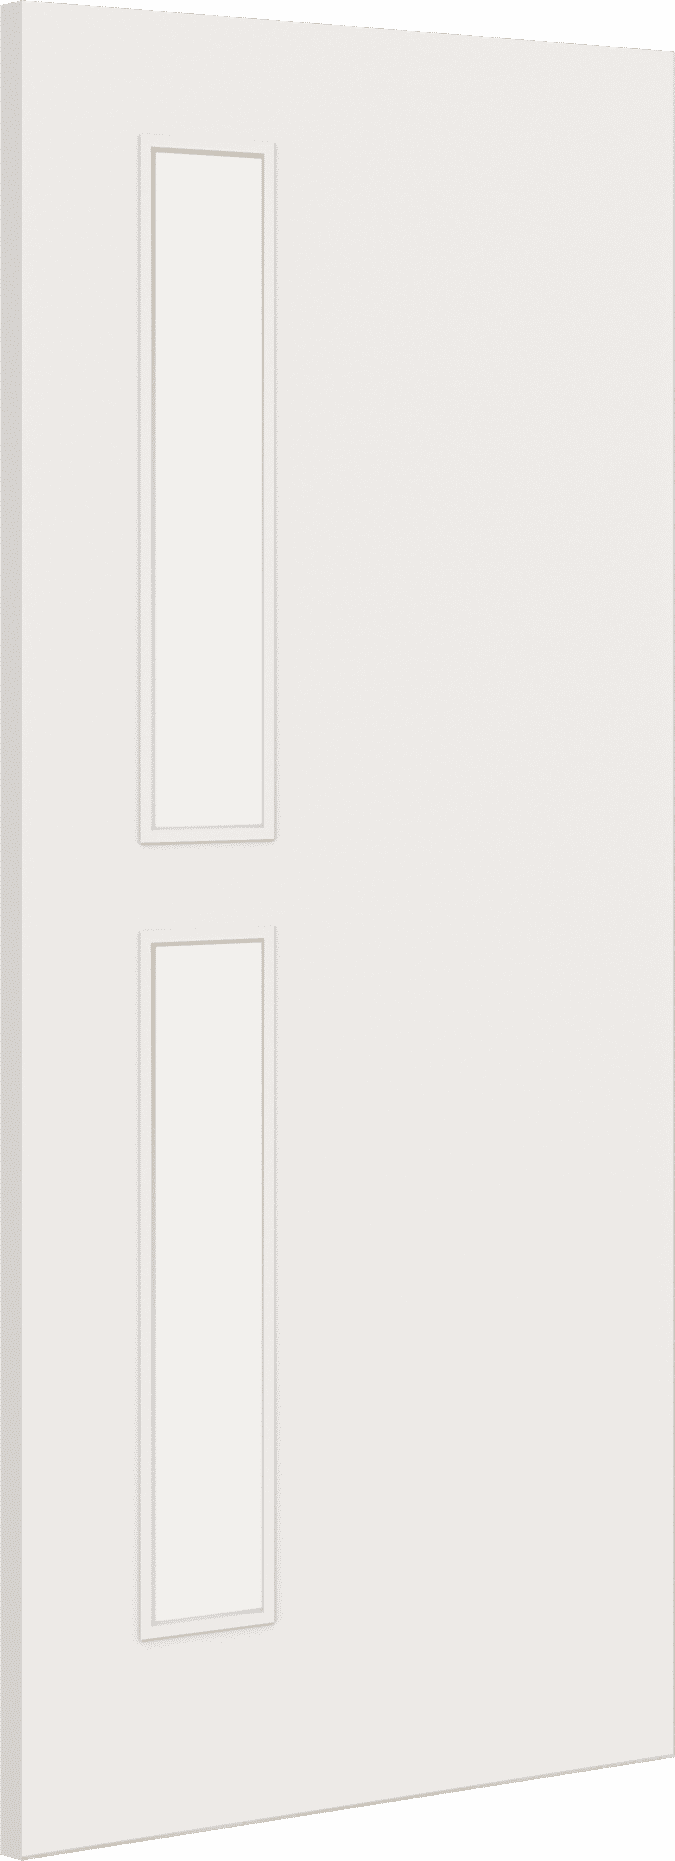 1981mm x 610mm x 44mm (24") Architectural Paint Grade White 07 Clear Glazed Fire Door Blank